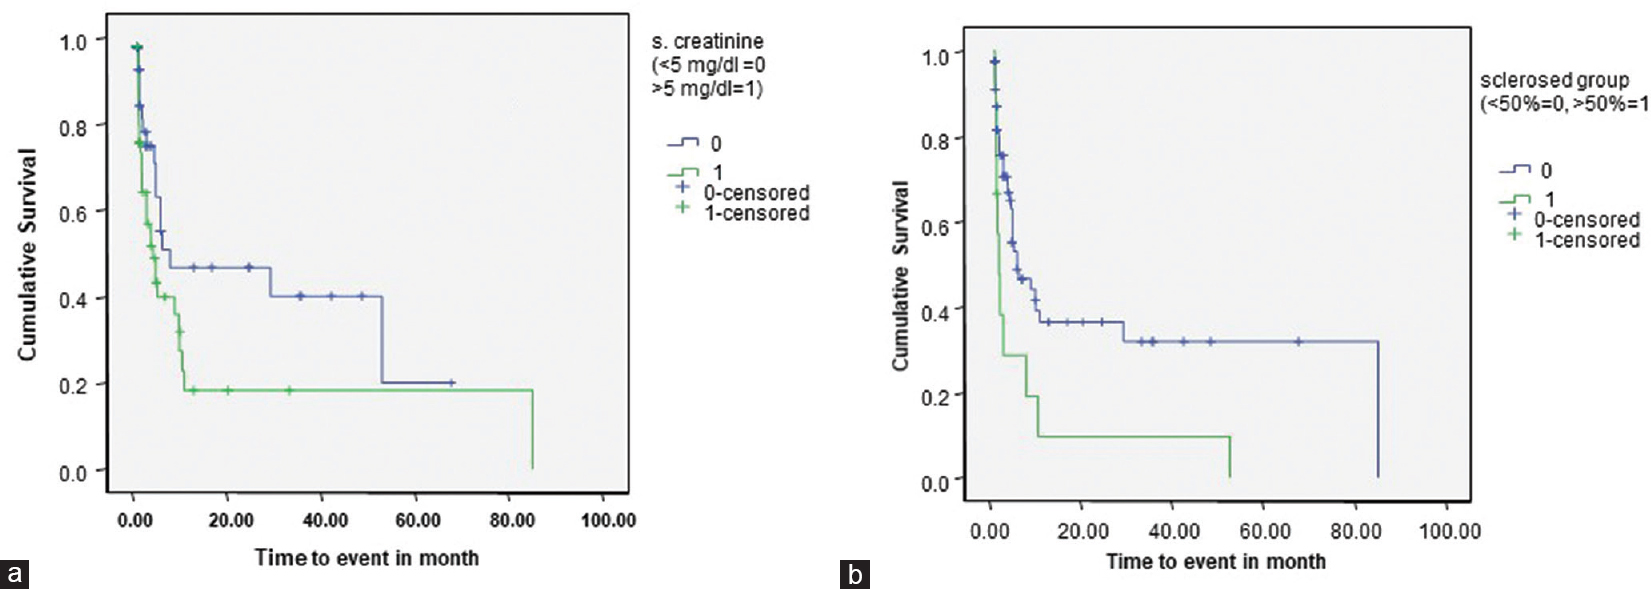 Poorer cumulative renal survival in patients of Crescentic Glomerulonephritis with (a) Serum Creatinine levels >5 mg/dl (P = 0.048) and (b) presence of >50% sclerosed glomeruli at the time of diagnosis (P = 0.010)